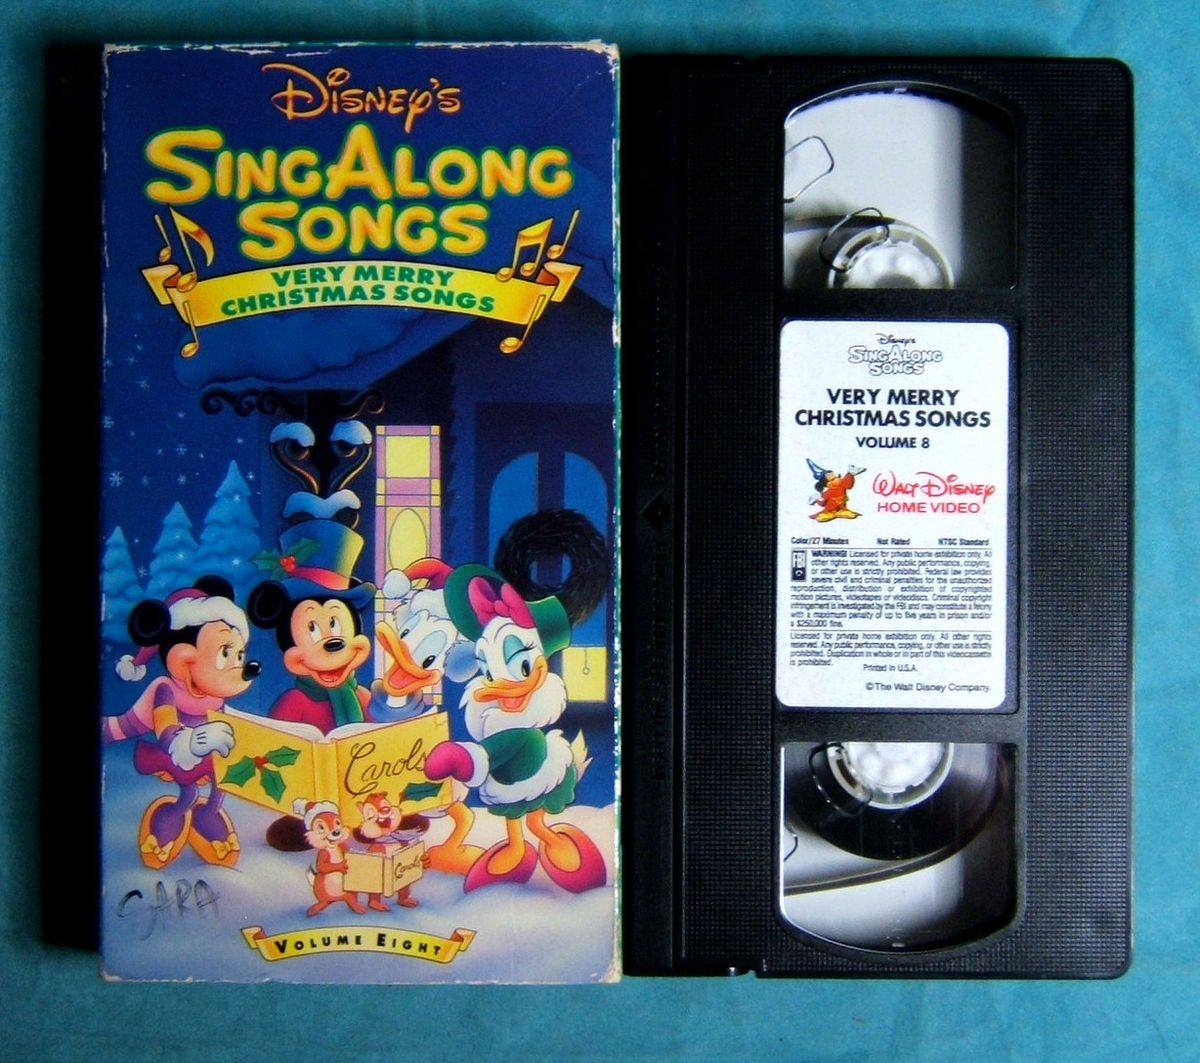 Disney Sing Along Very Merry Christmas Songs VHS Volume 8 Mickey Mouse.